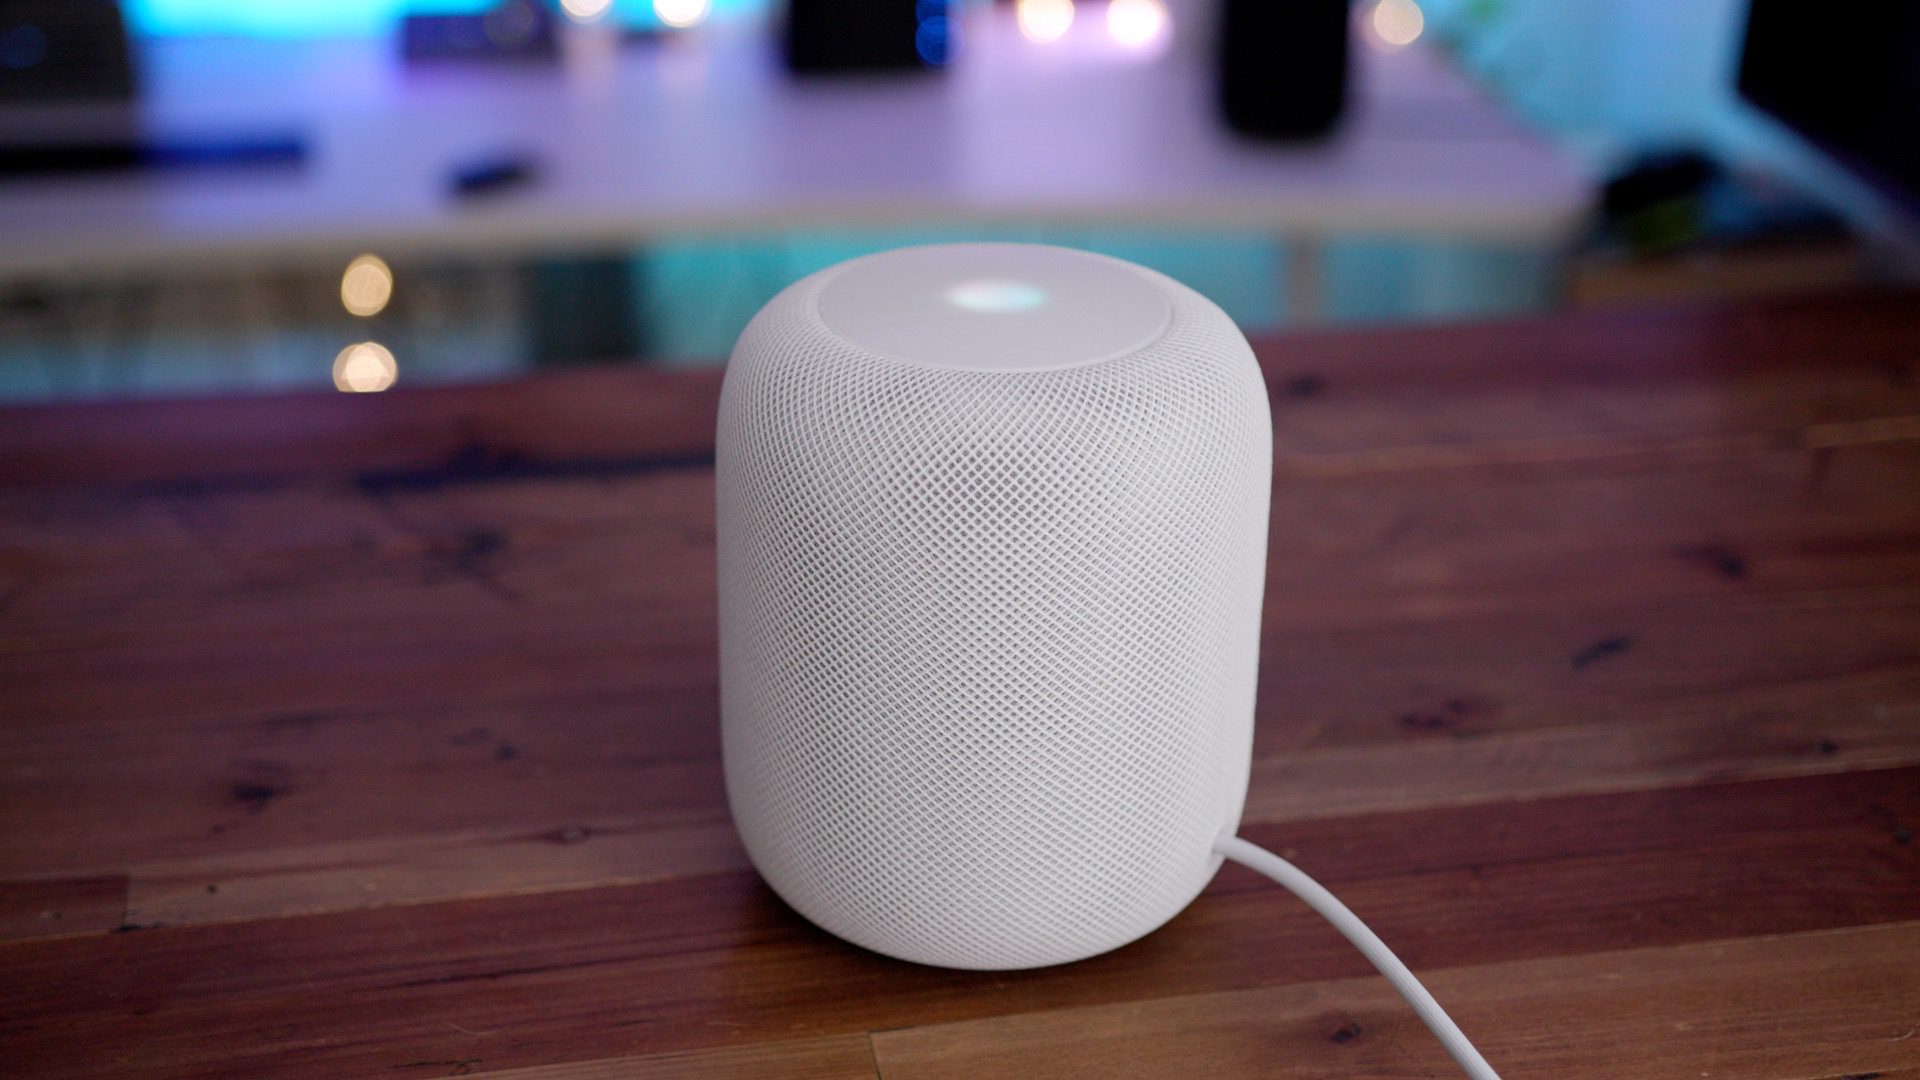 Apple's HomePod packs AirPlay 2 + more, on sale from $194.50 